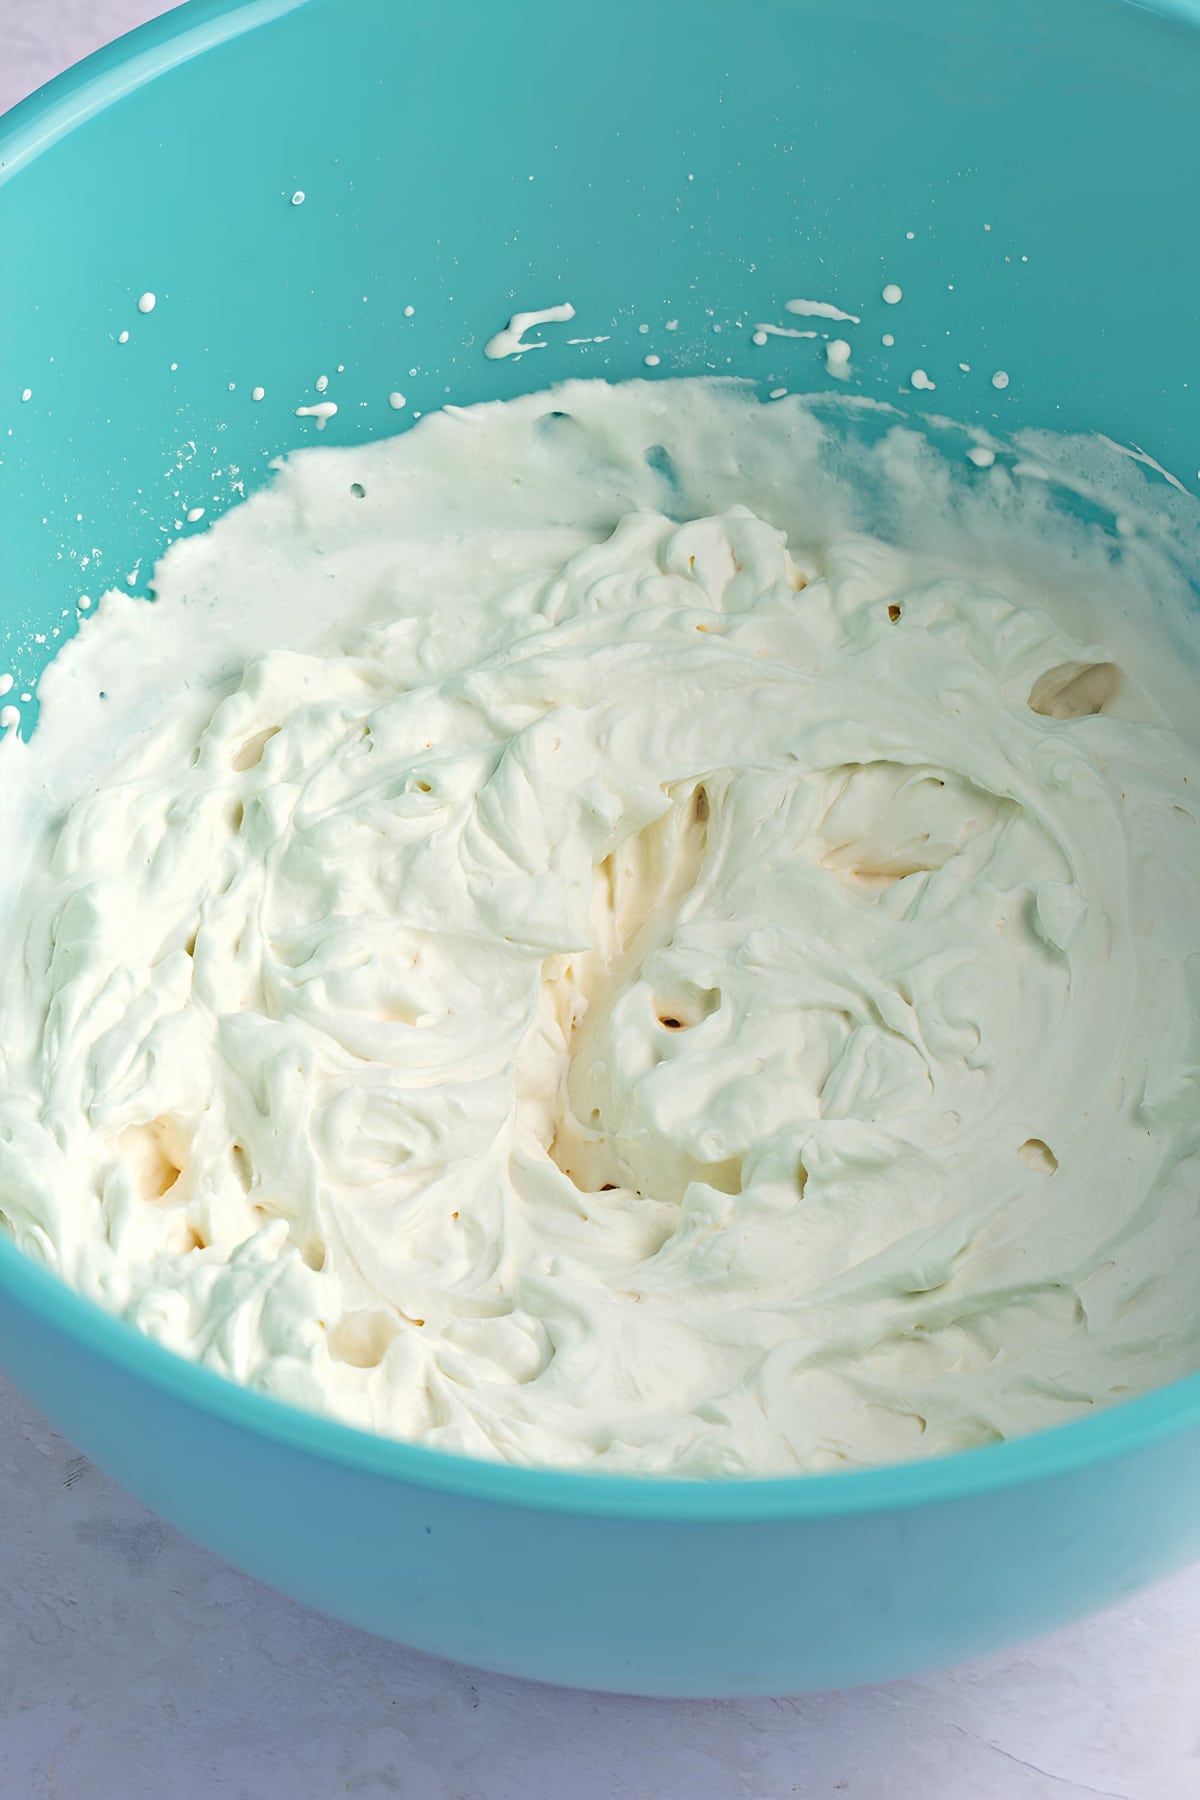 A Bowl of Homemade Whipped Cream